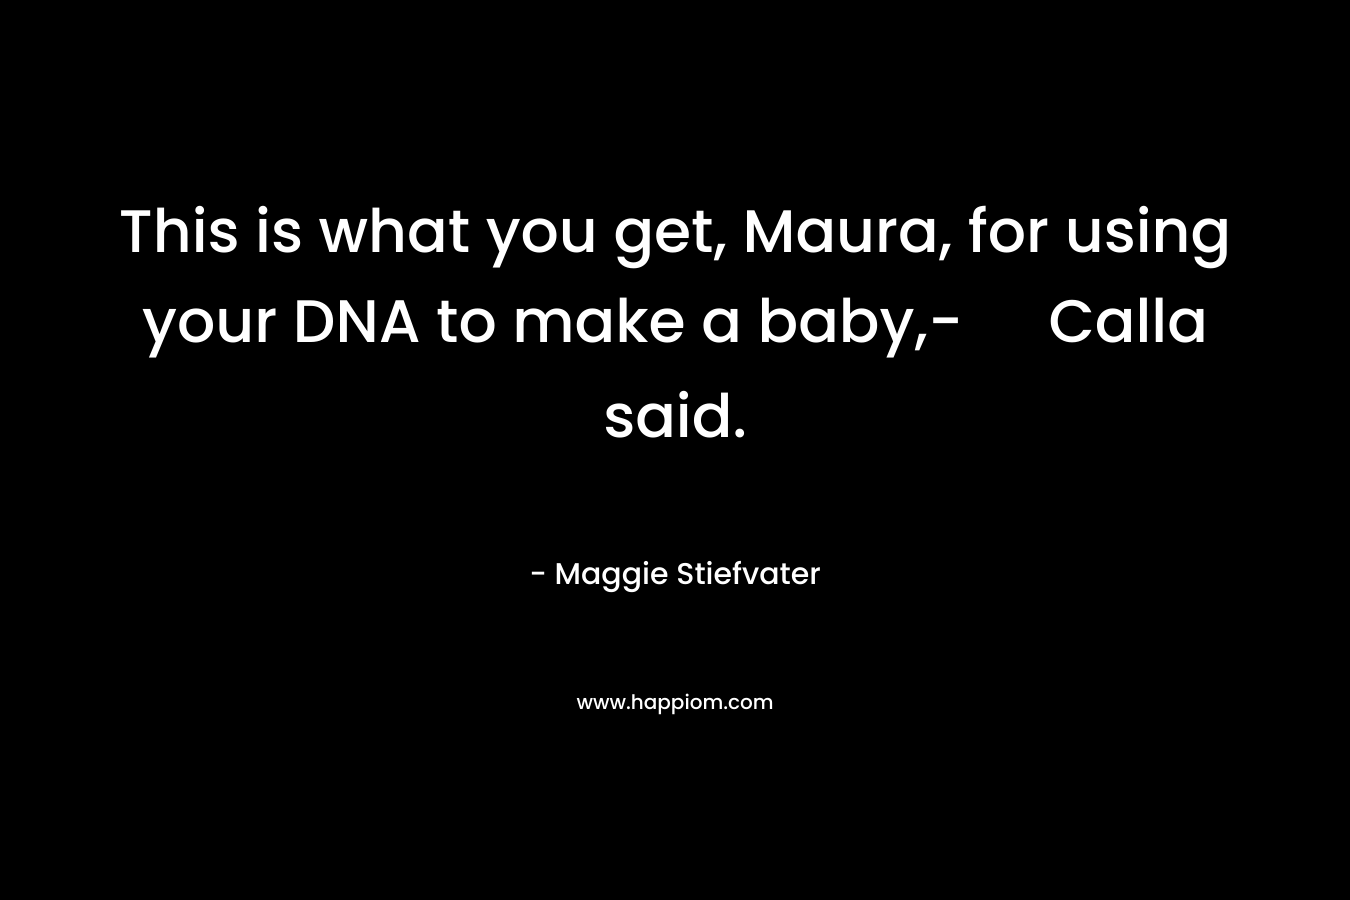 This is what you get, Maura, for using your DNA to make a baby,- Calla said. – Maggie Stiefvater